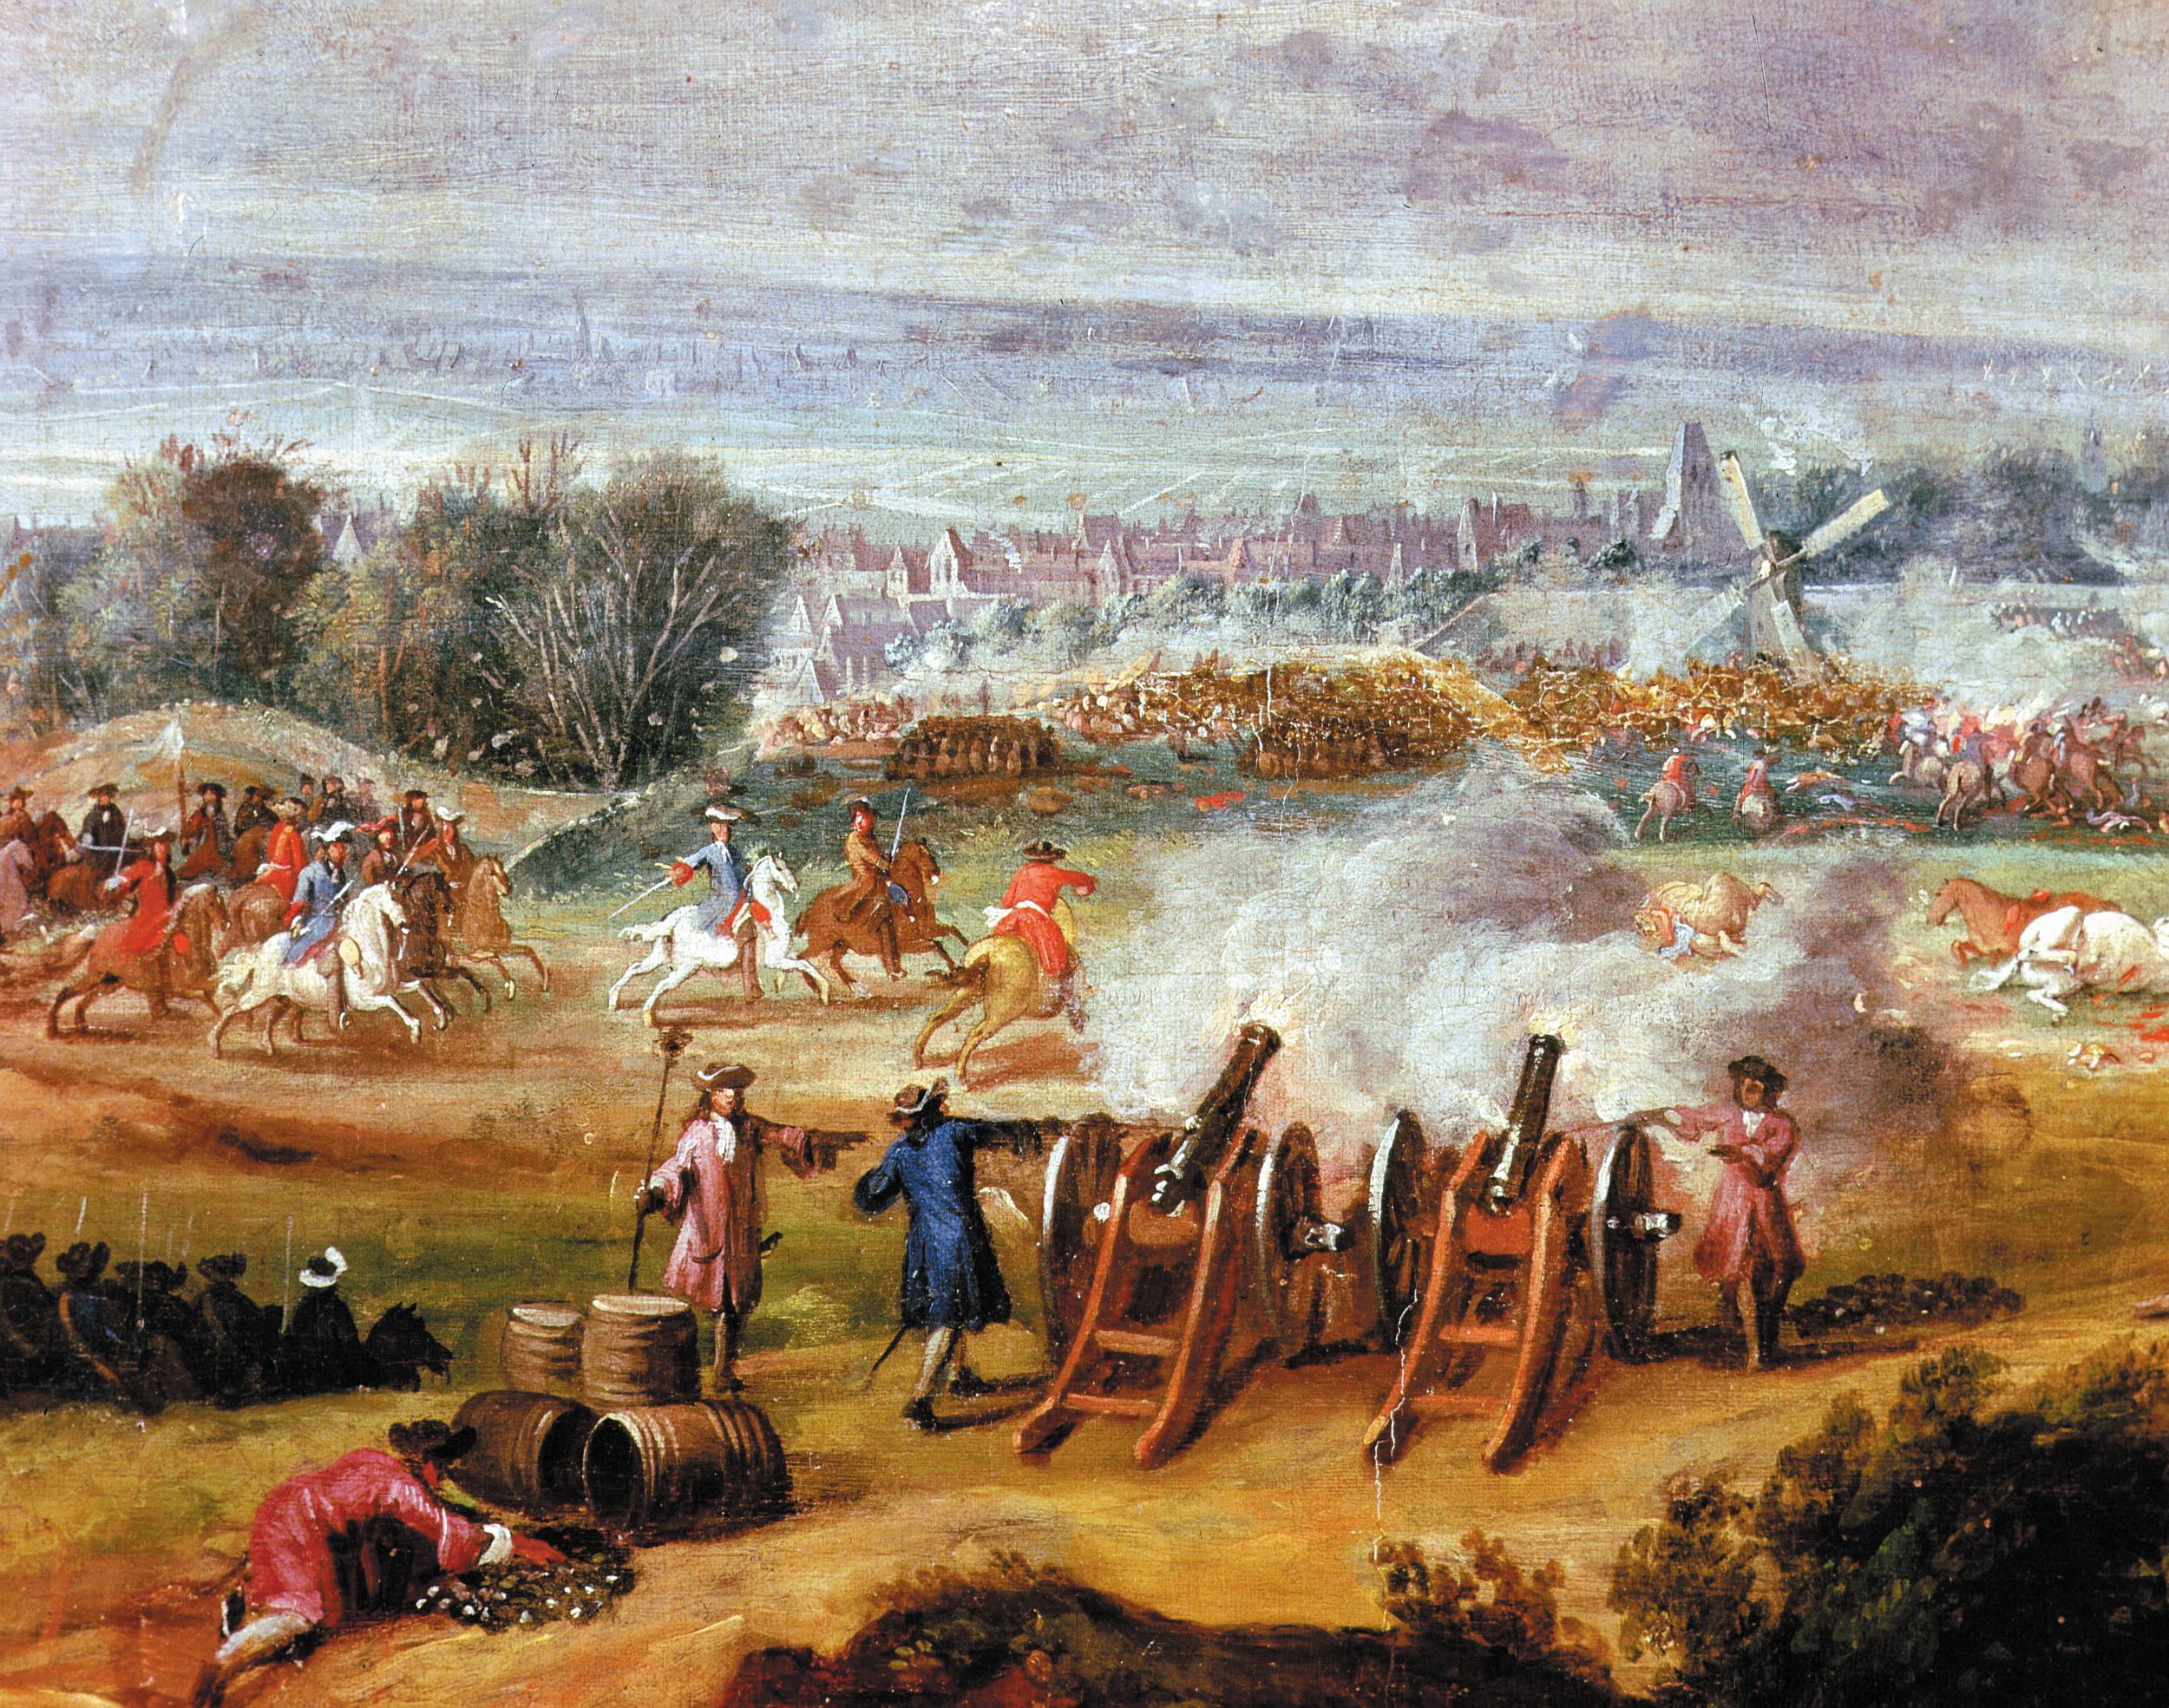 This detail of a period painting shows artillery in action in 1649. Artillery fire on both sides was largely ineffective.